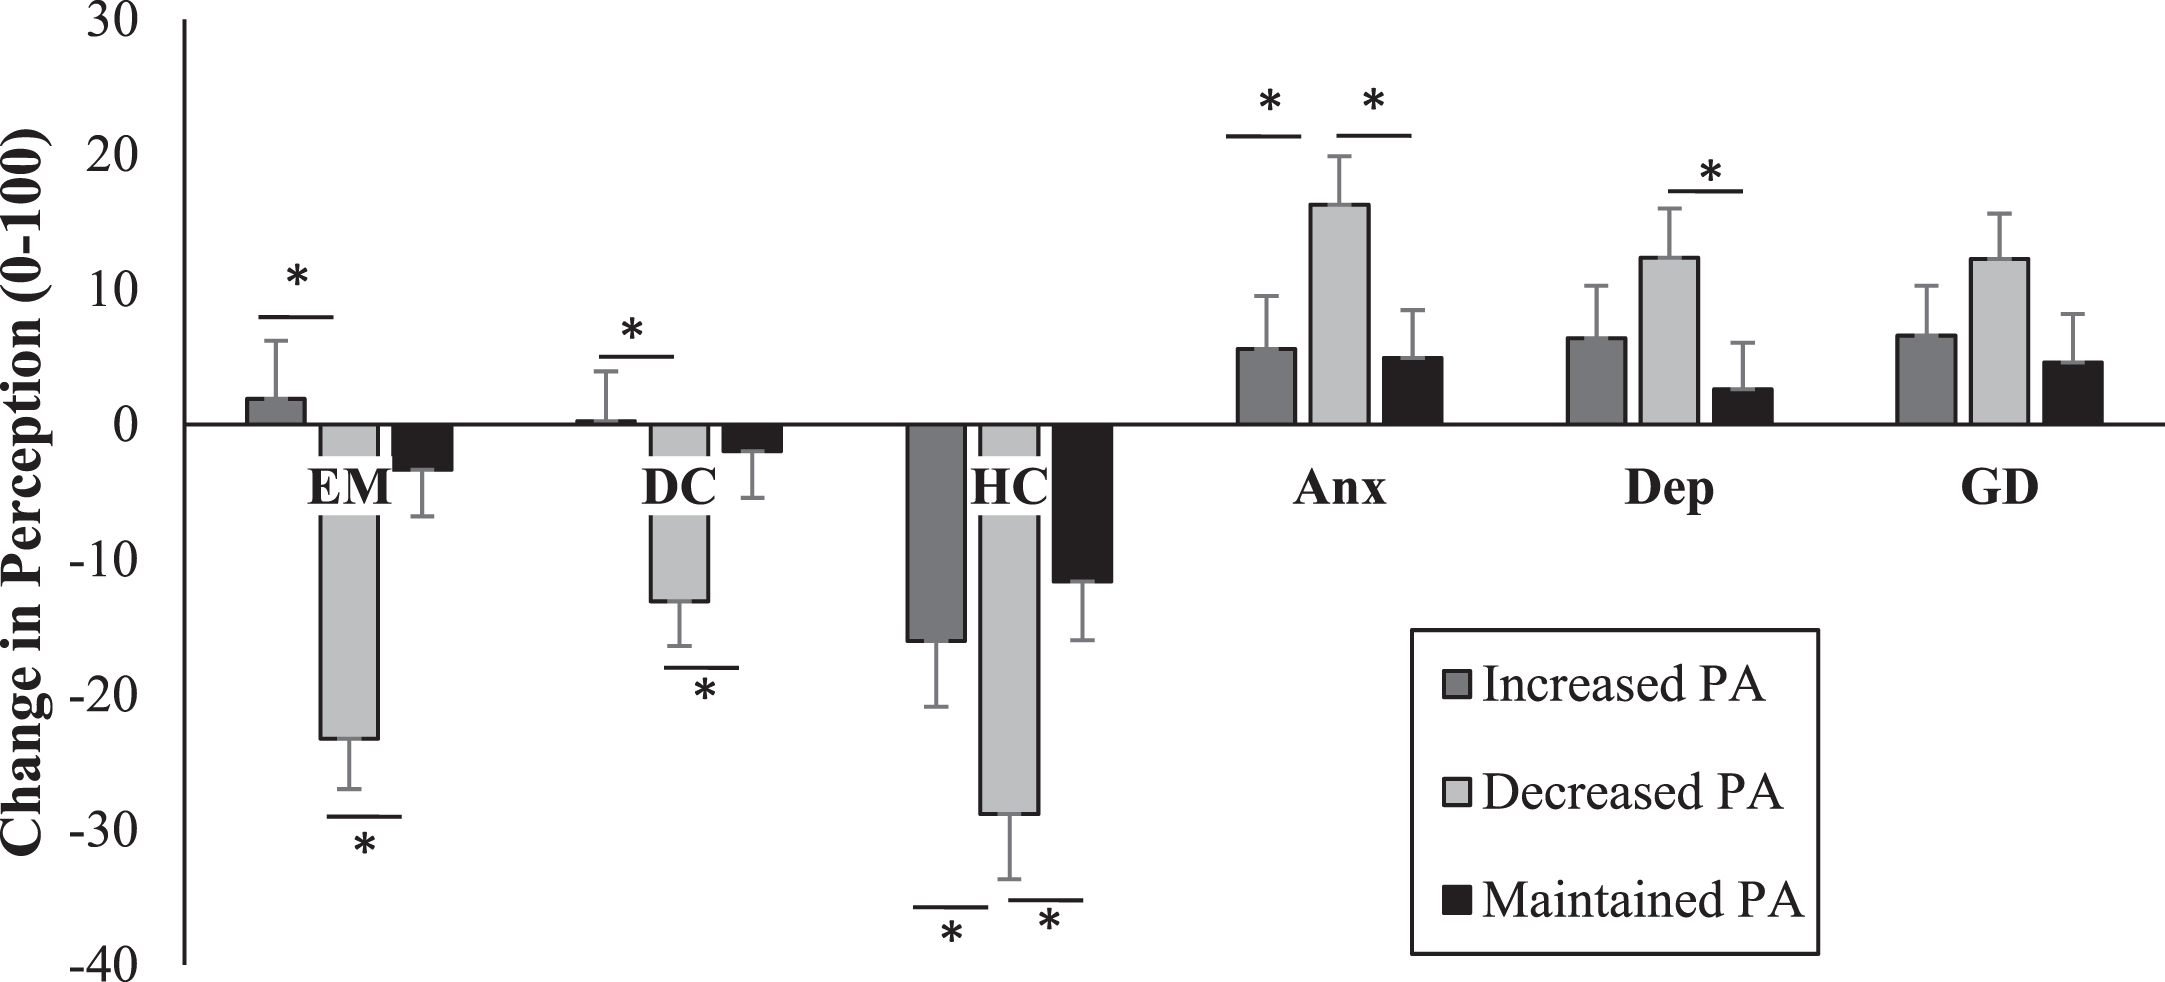 Average change in perceived difference in exercise motivation (EM), dietary choices (DC), access to health care (HC), anxiety (Anx), depression (Dep) and general discomfort (GD) from pre-shutdown to during peak local shutdown. Asterisks (*) denote significant differences (p < 0.05) between groups.